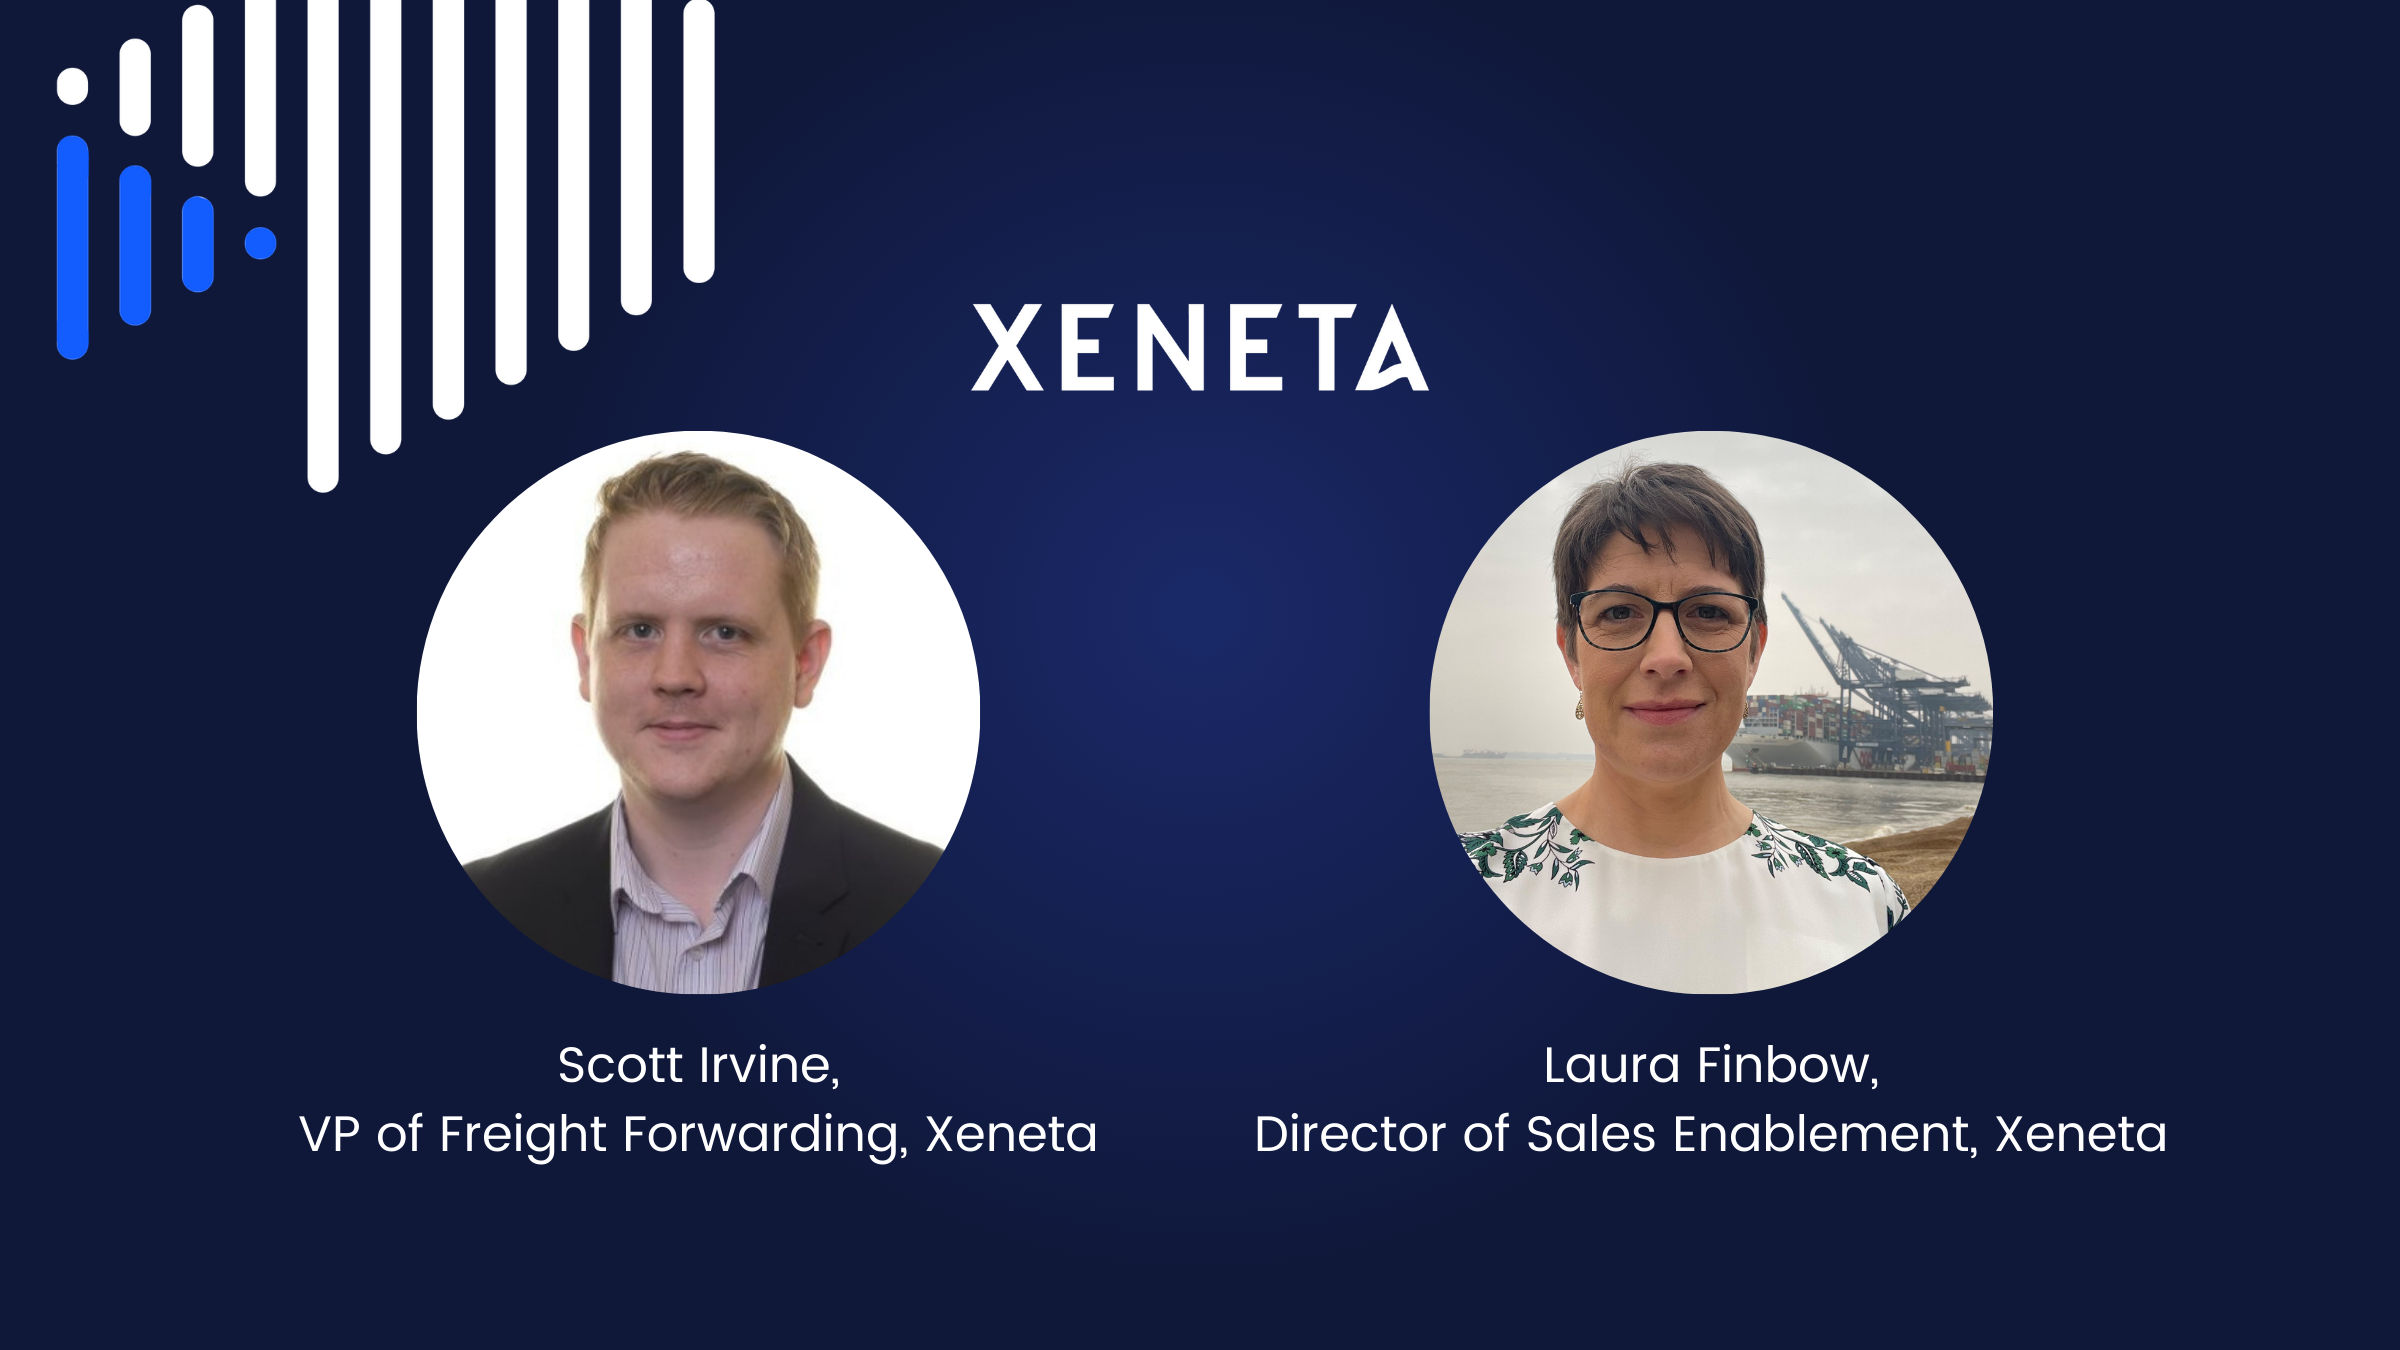 Xeneta welcomes Scott Irvine as VP of Freight Forwarding and Laura Finbow as Director of Sales Enablement